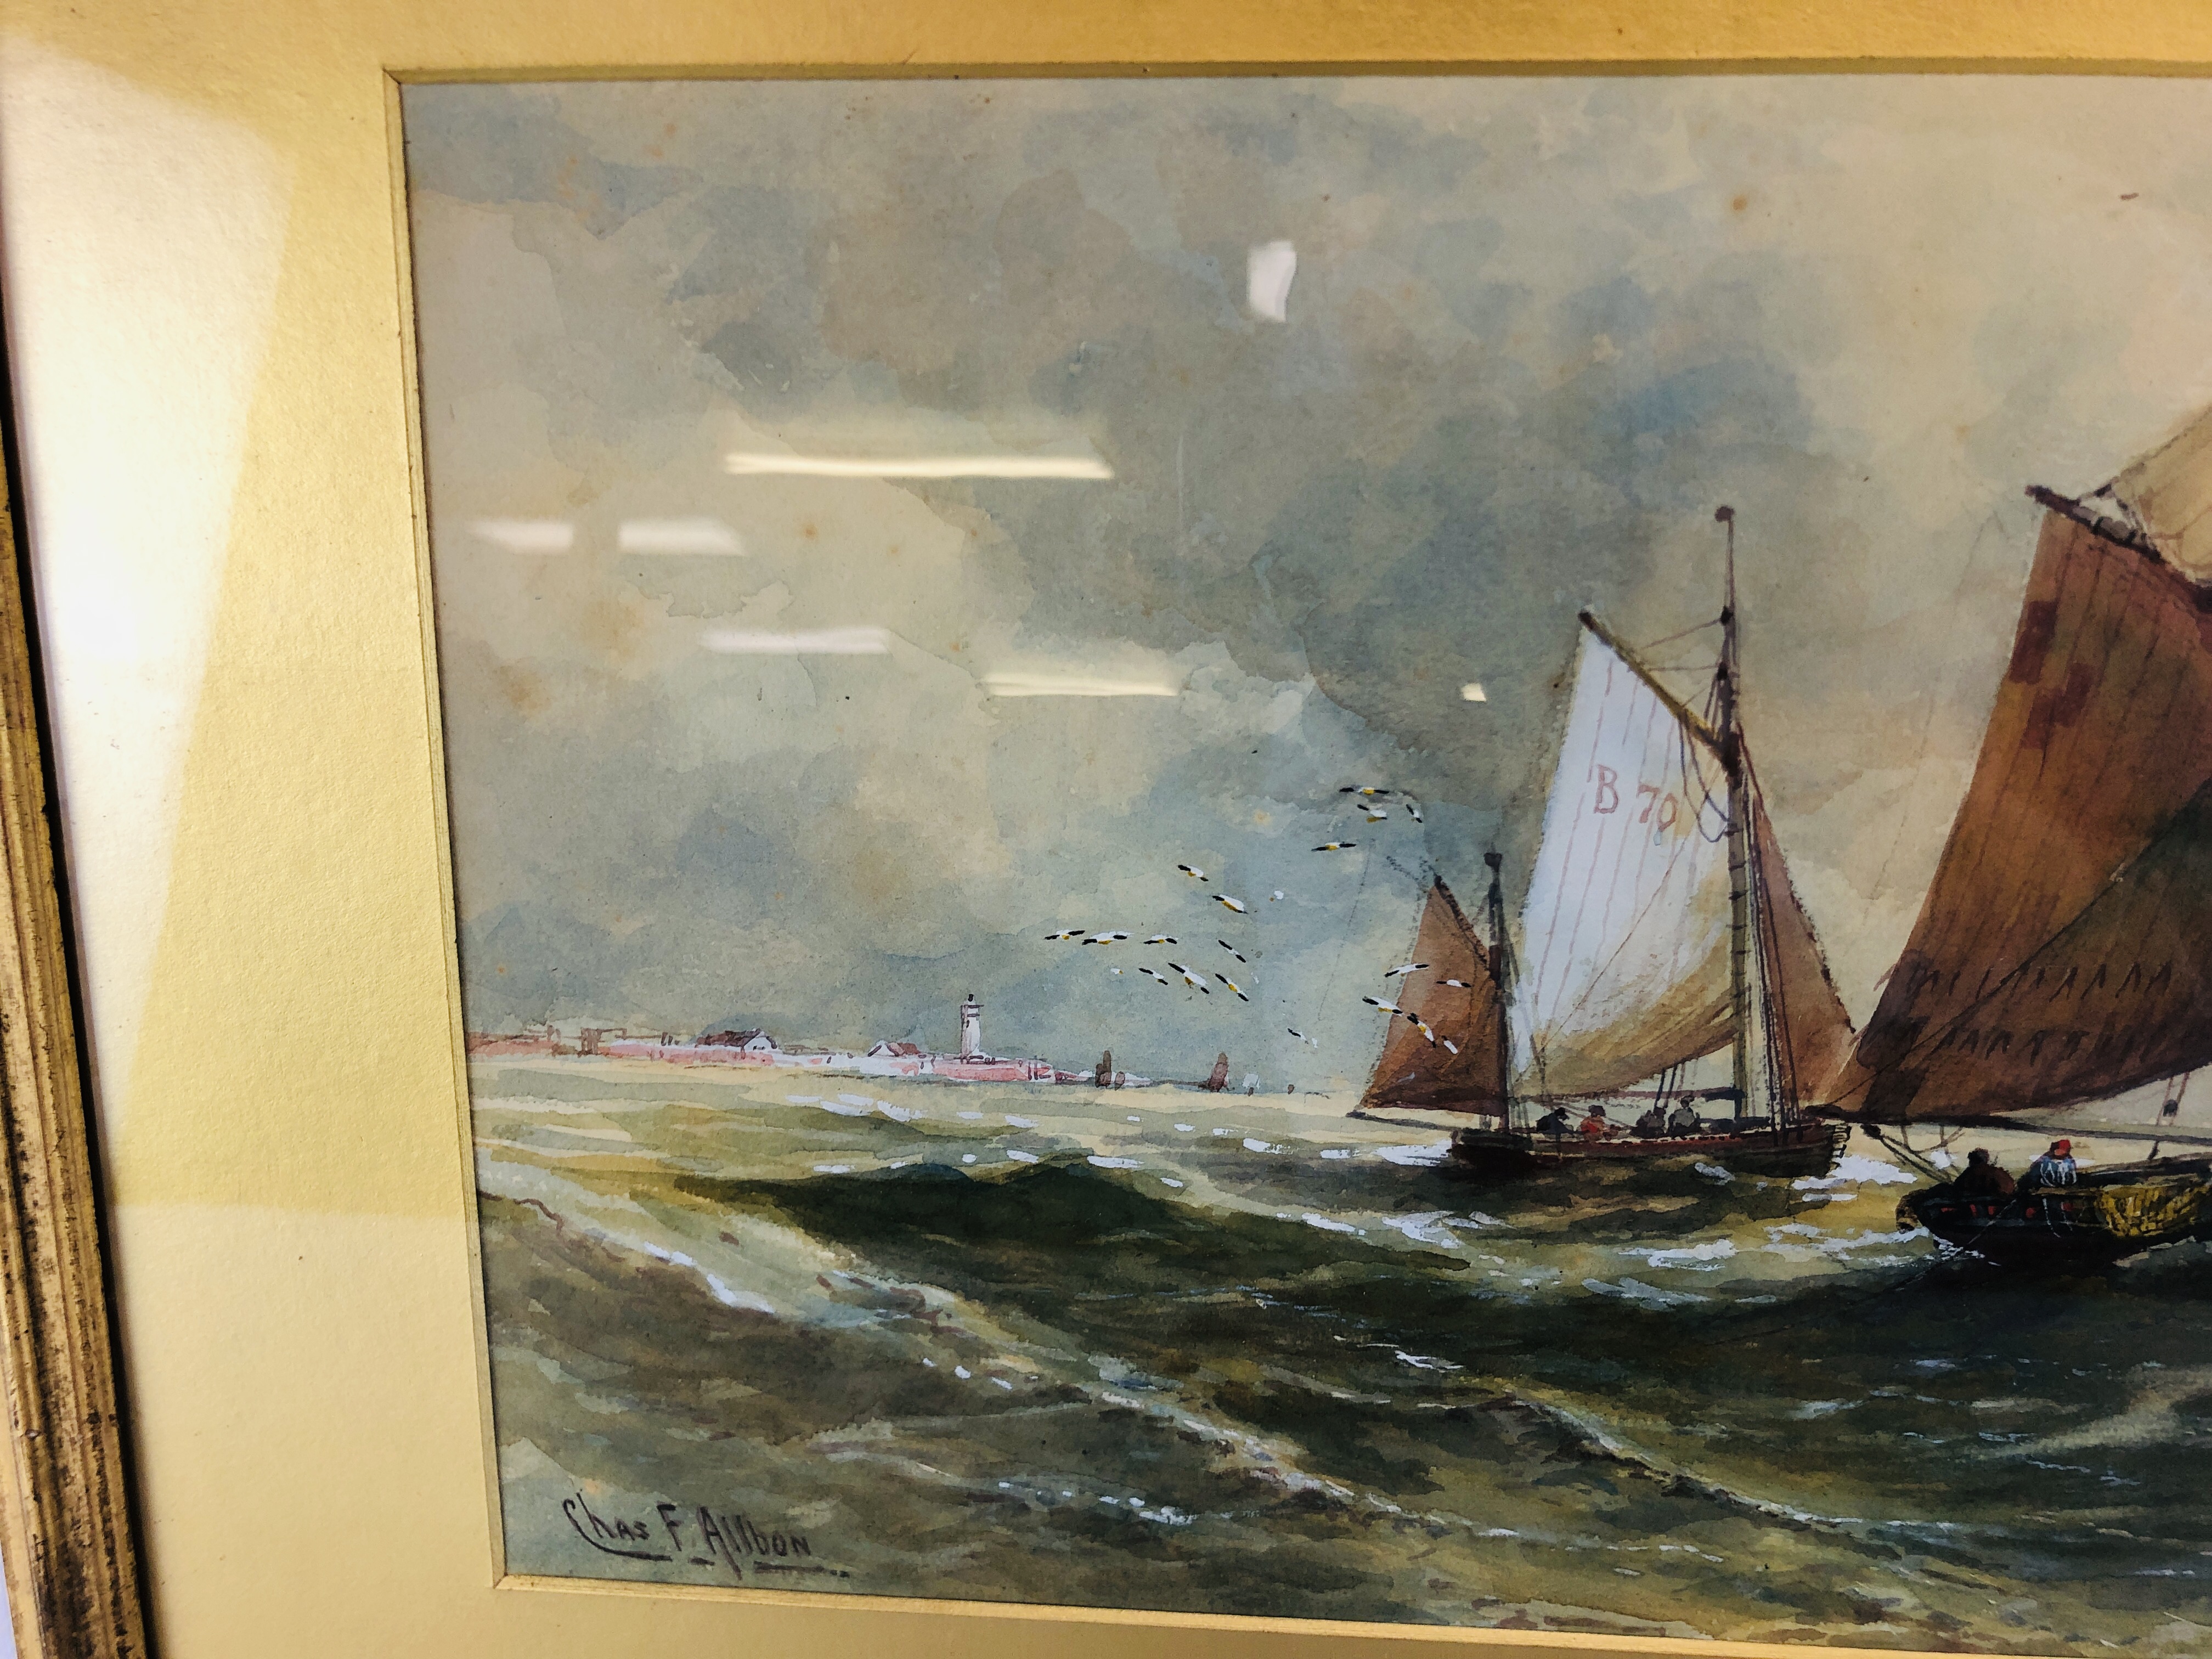 A CHAS. F. ALLBON FRAMED WATERCOLOUR DEPICTING SAILING BOATS OUT TO SEA. - Image 4 of 6